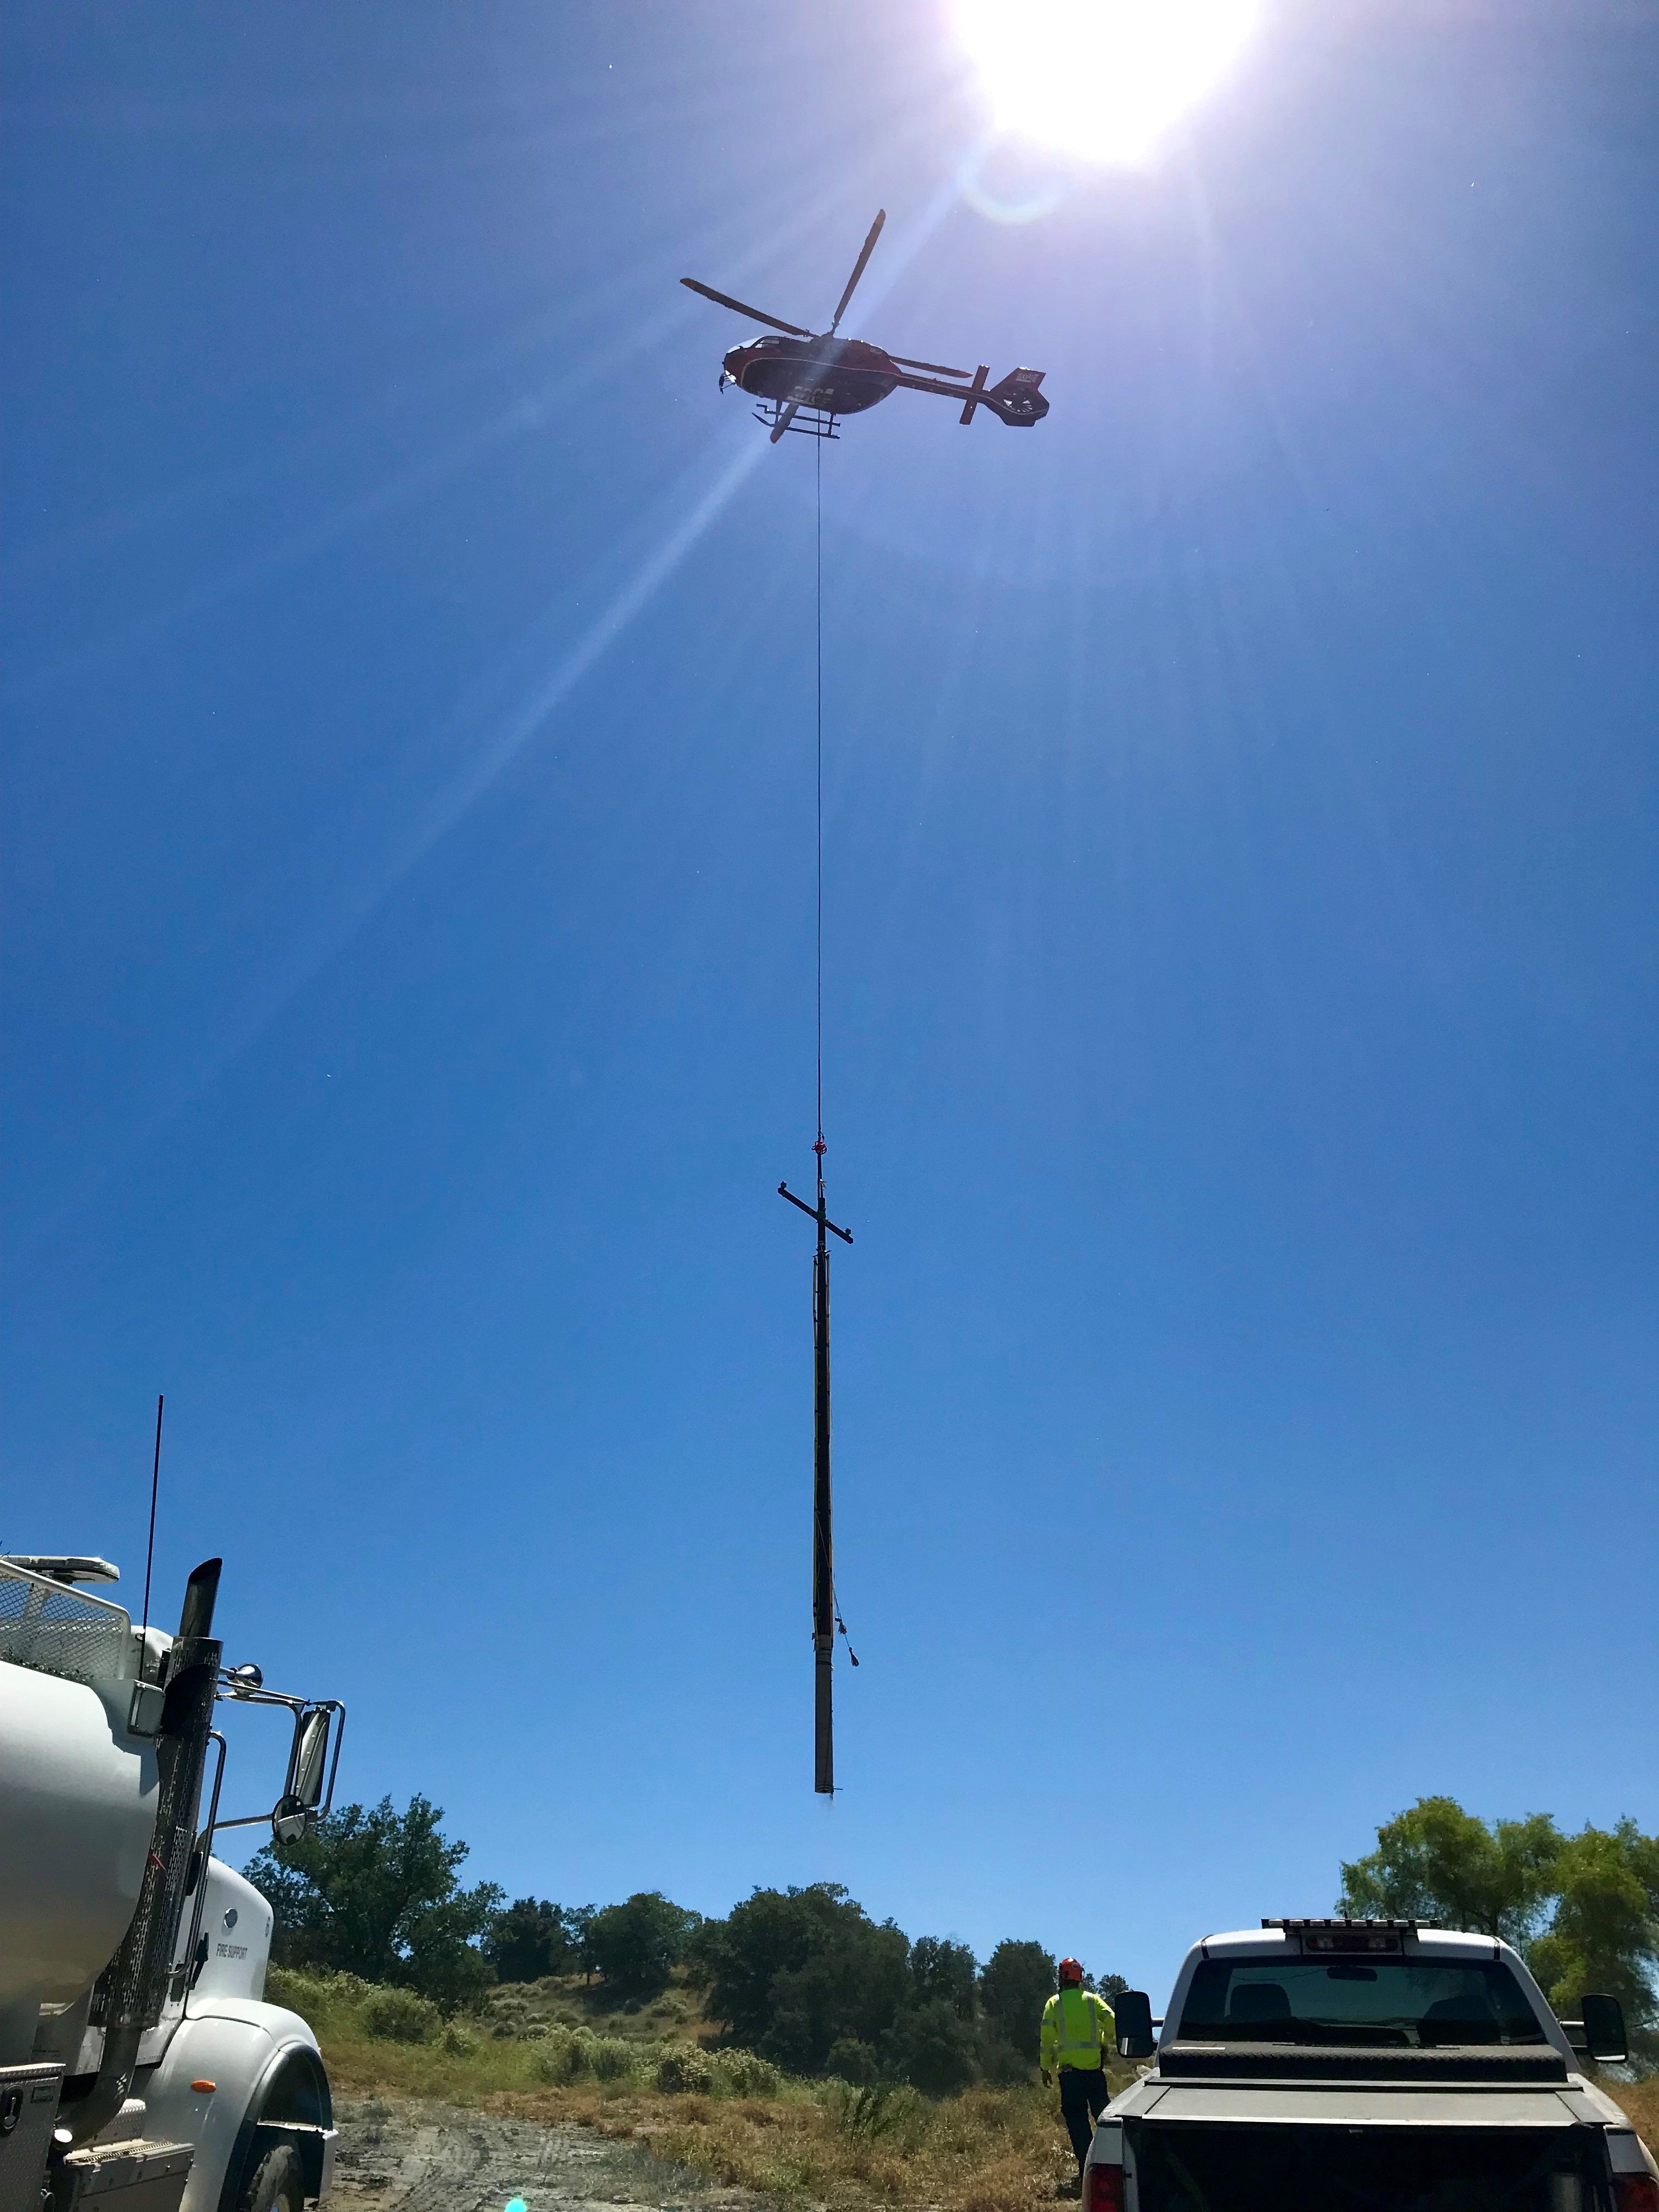 Helicopter setting a power pole